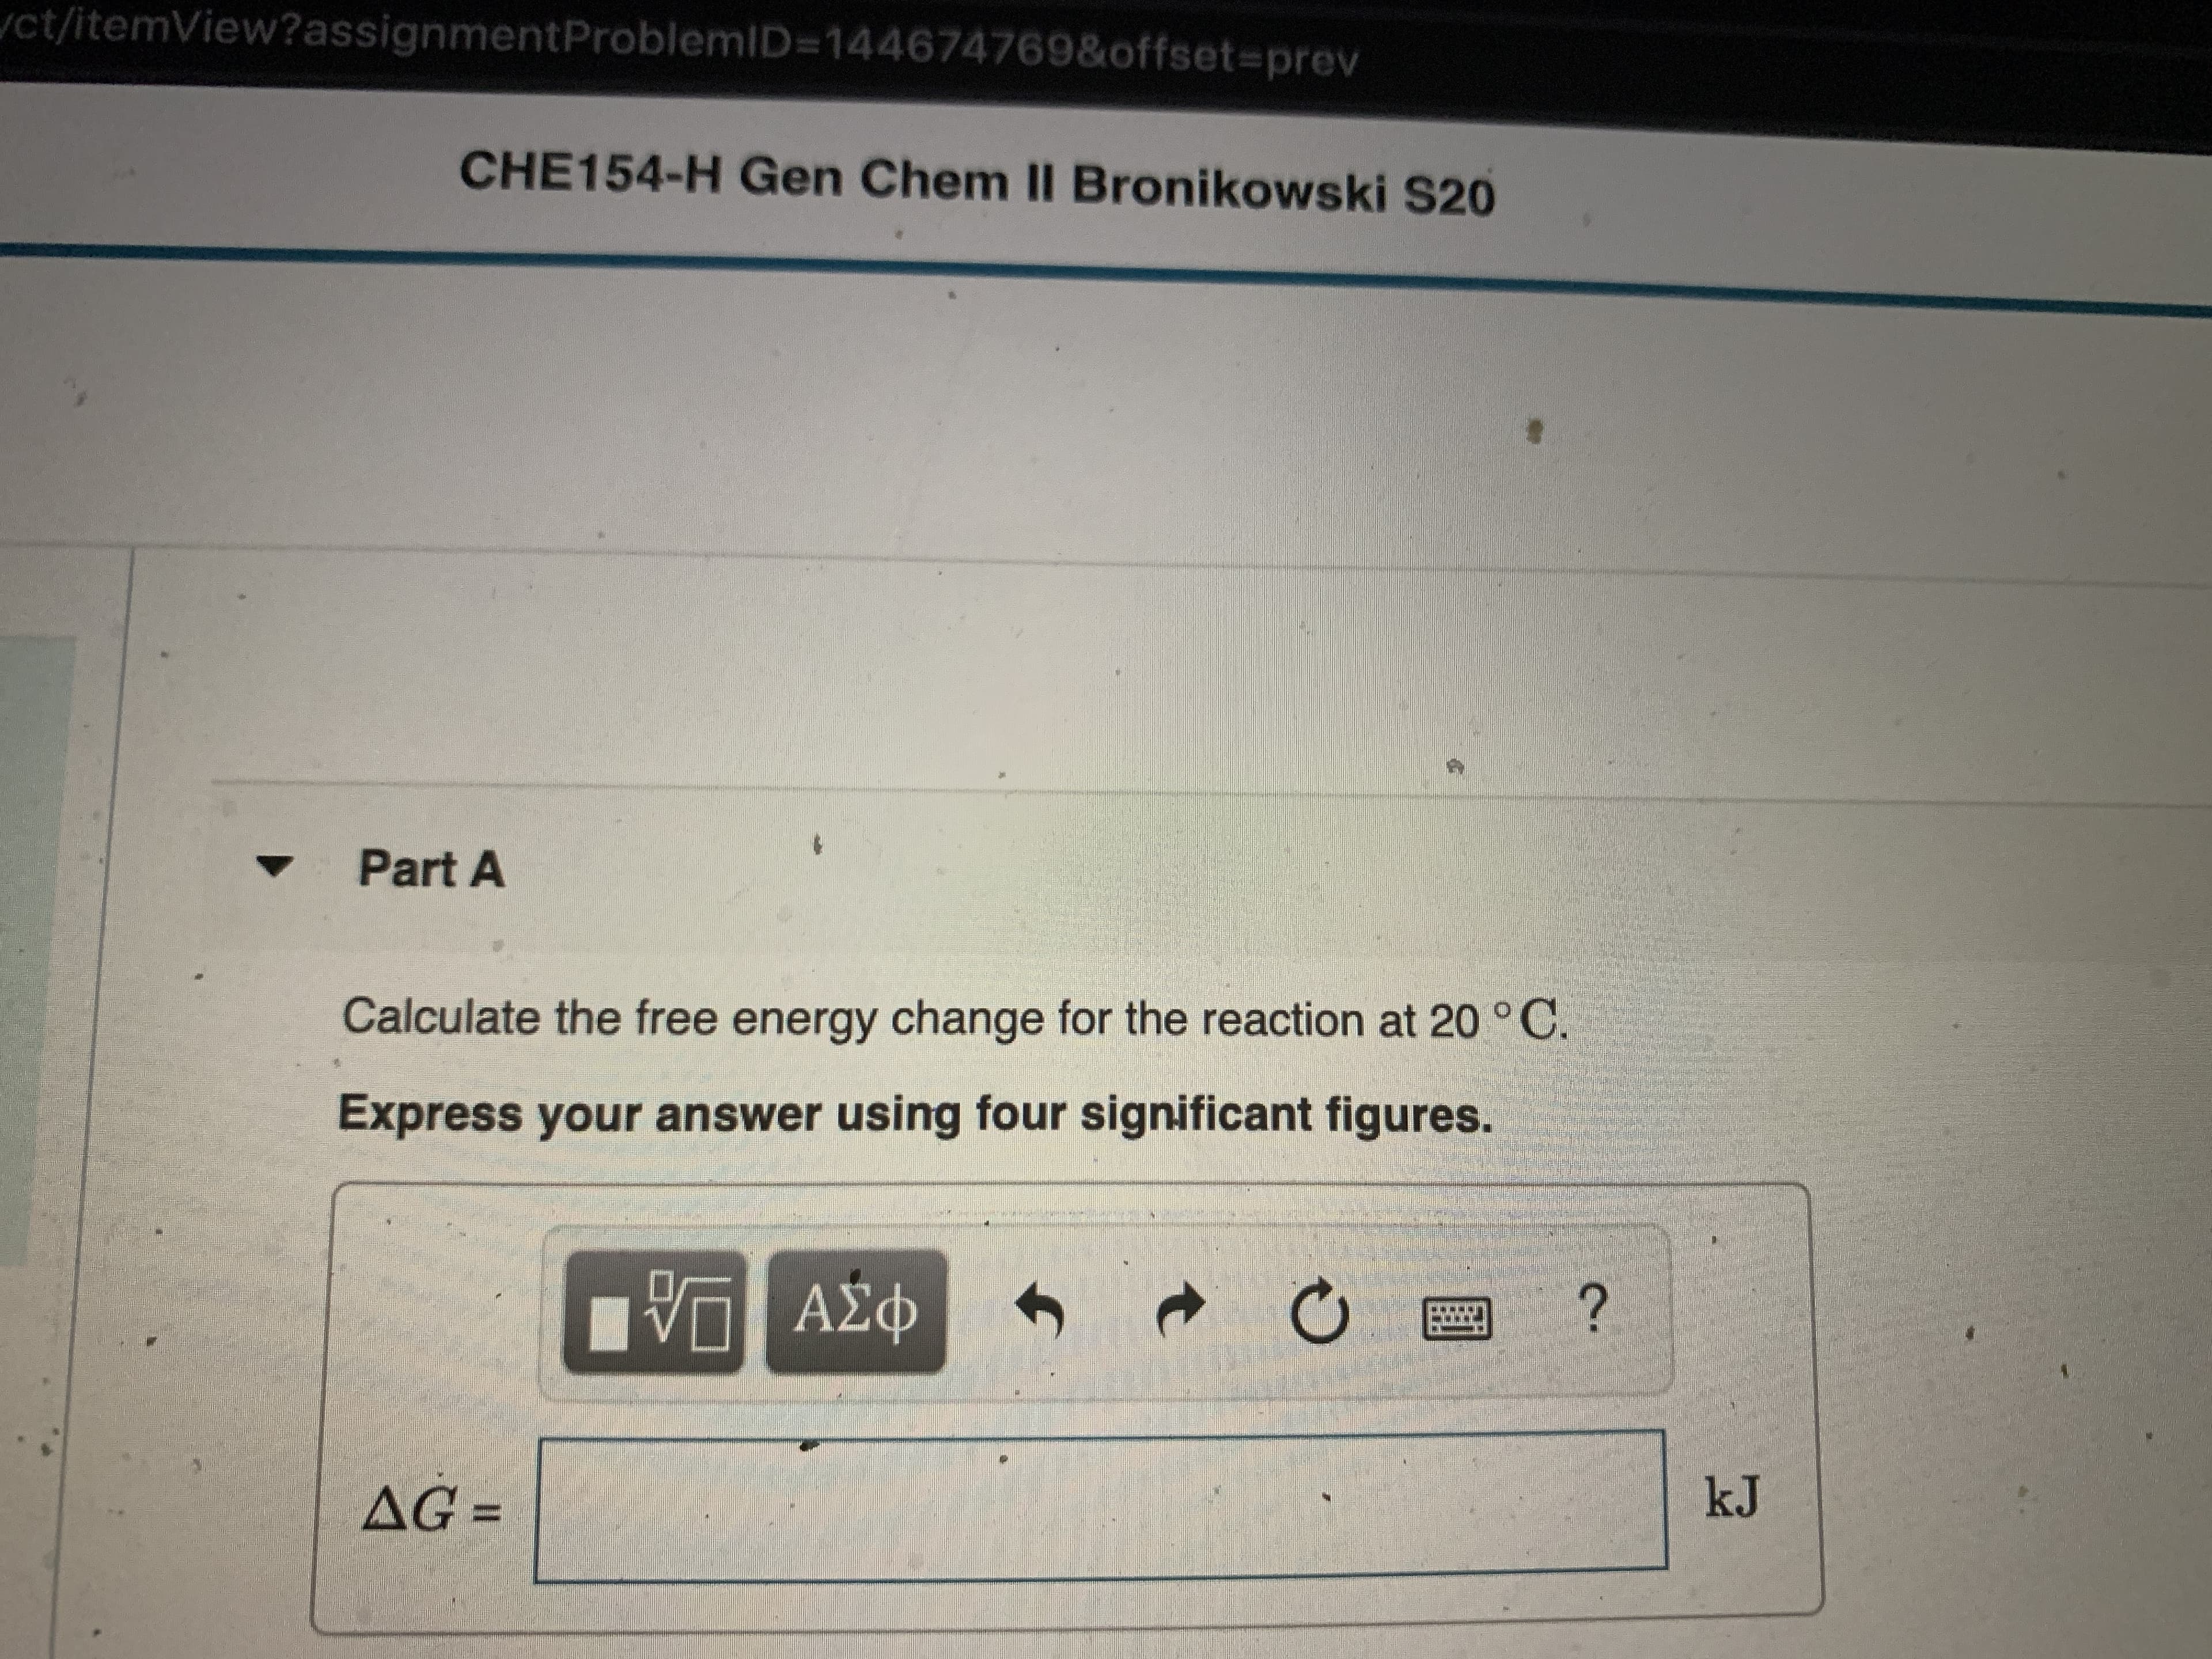 ct/itemView?assignmentProblemID=144674769&offset3prev
CHE154-H Gen Chem II Bronikowski S20
Part A
Calculate the free energy change for the reaction at 20 °C.
Express your answer using four significant figures.
AG =
kJ
